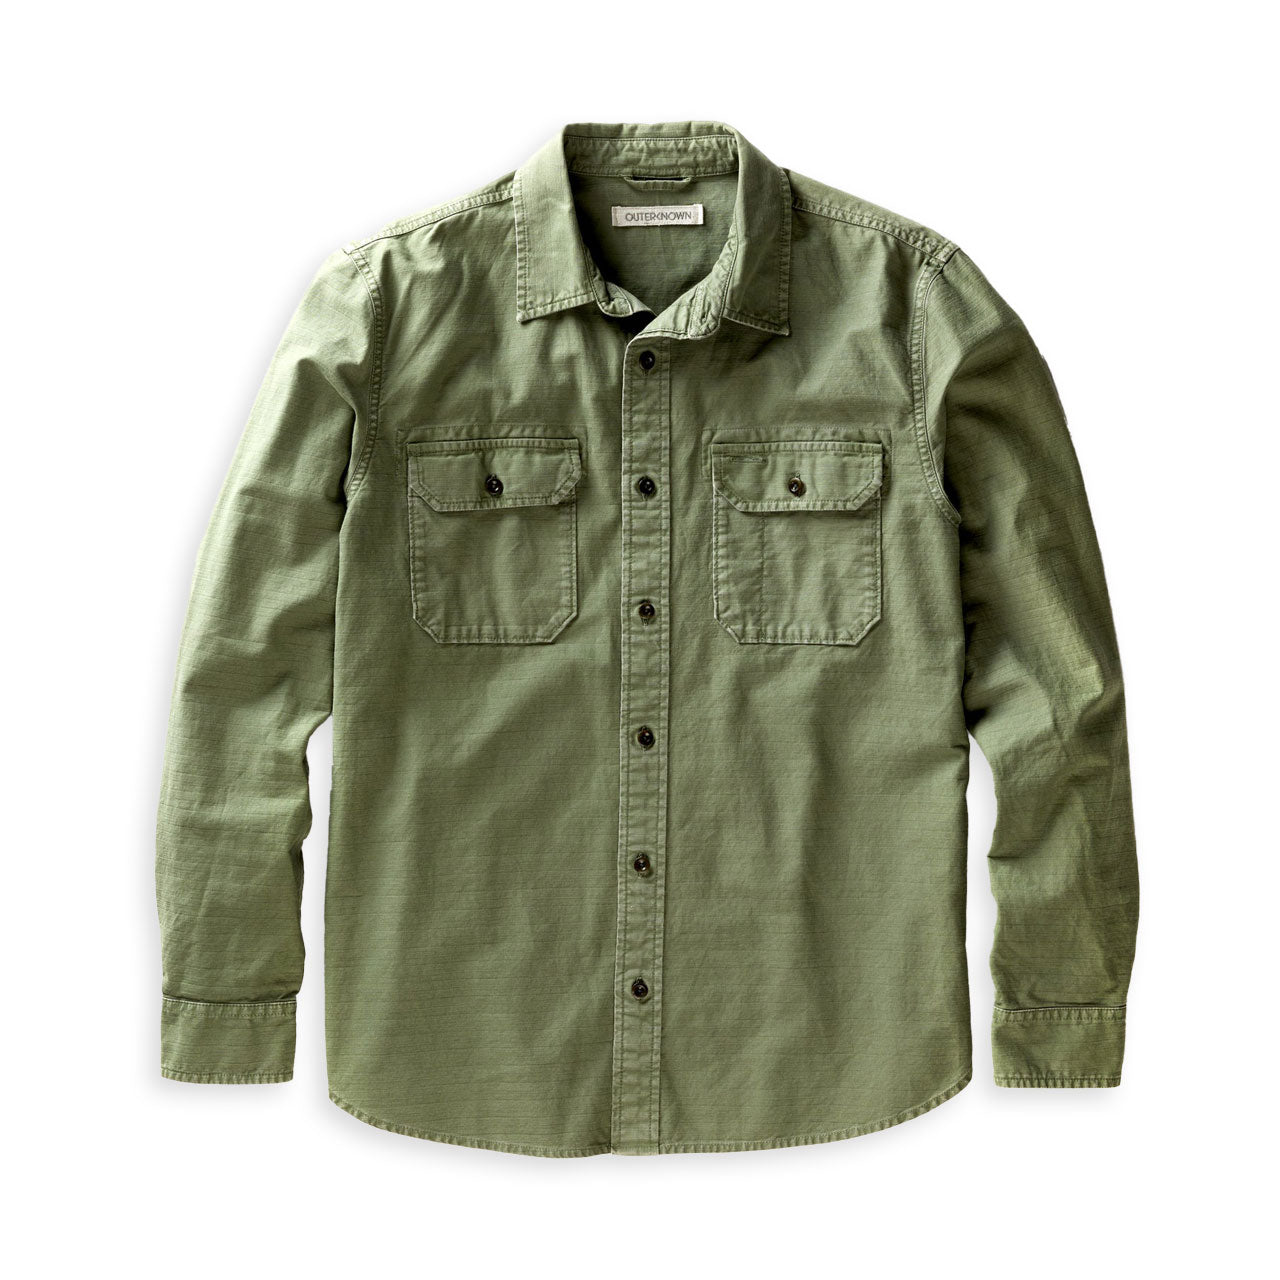 Outerknown Utilitarian Shirt | Uncrate Supply